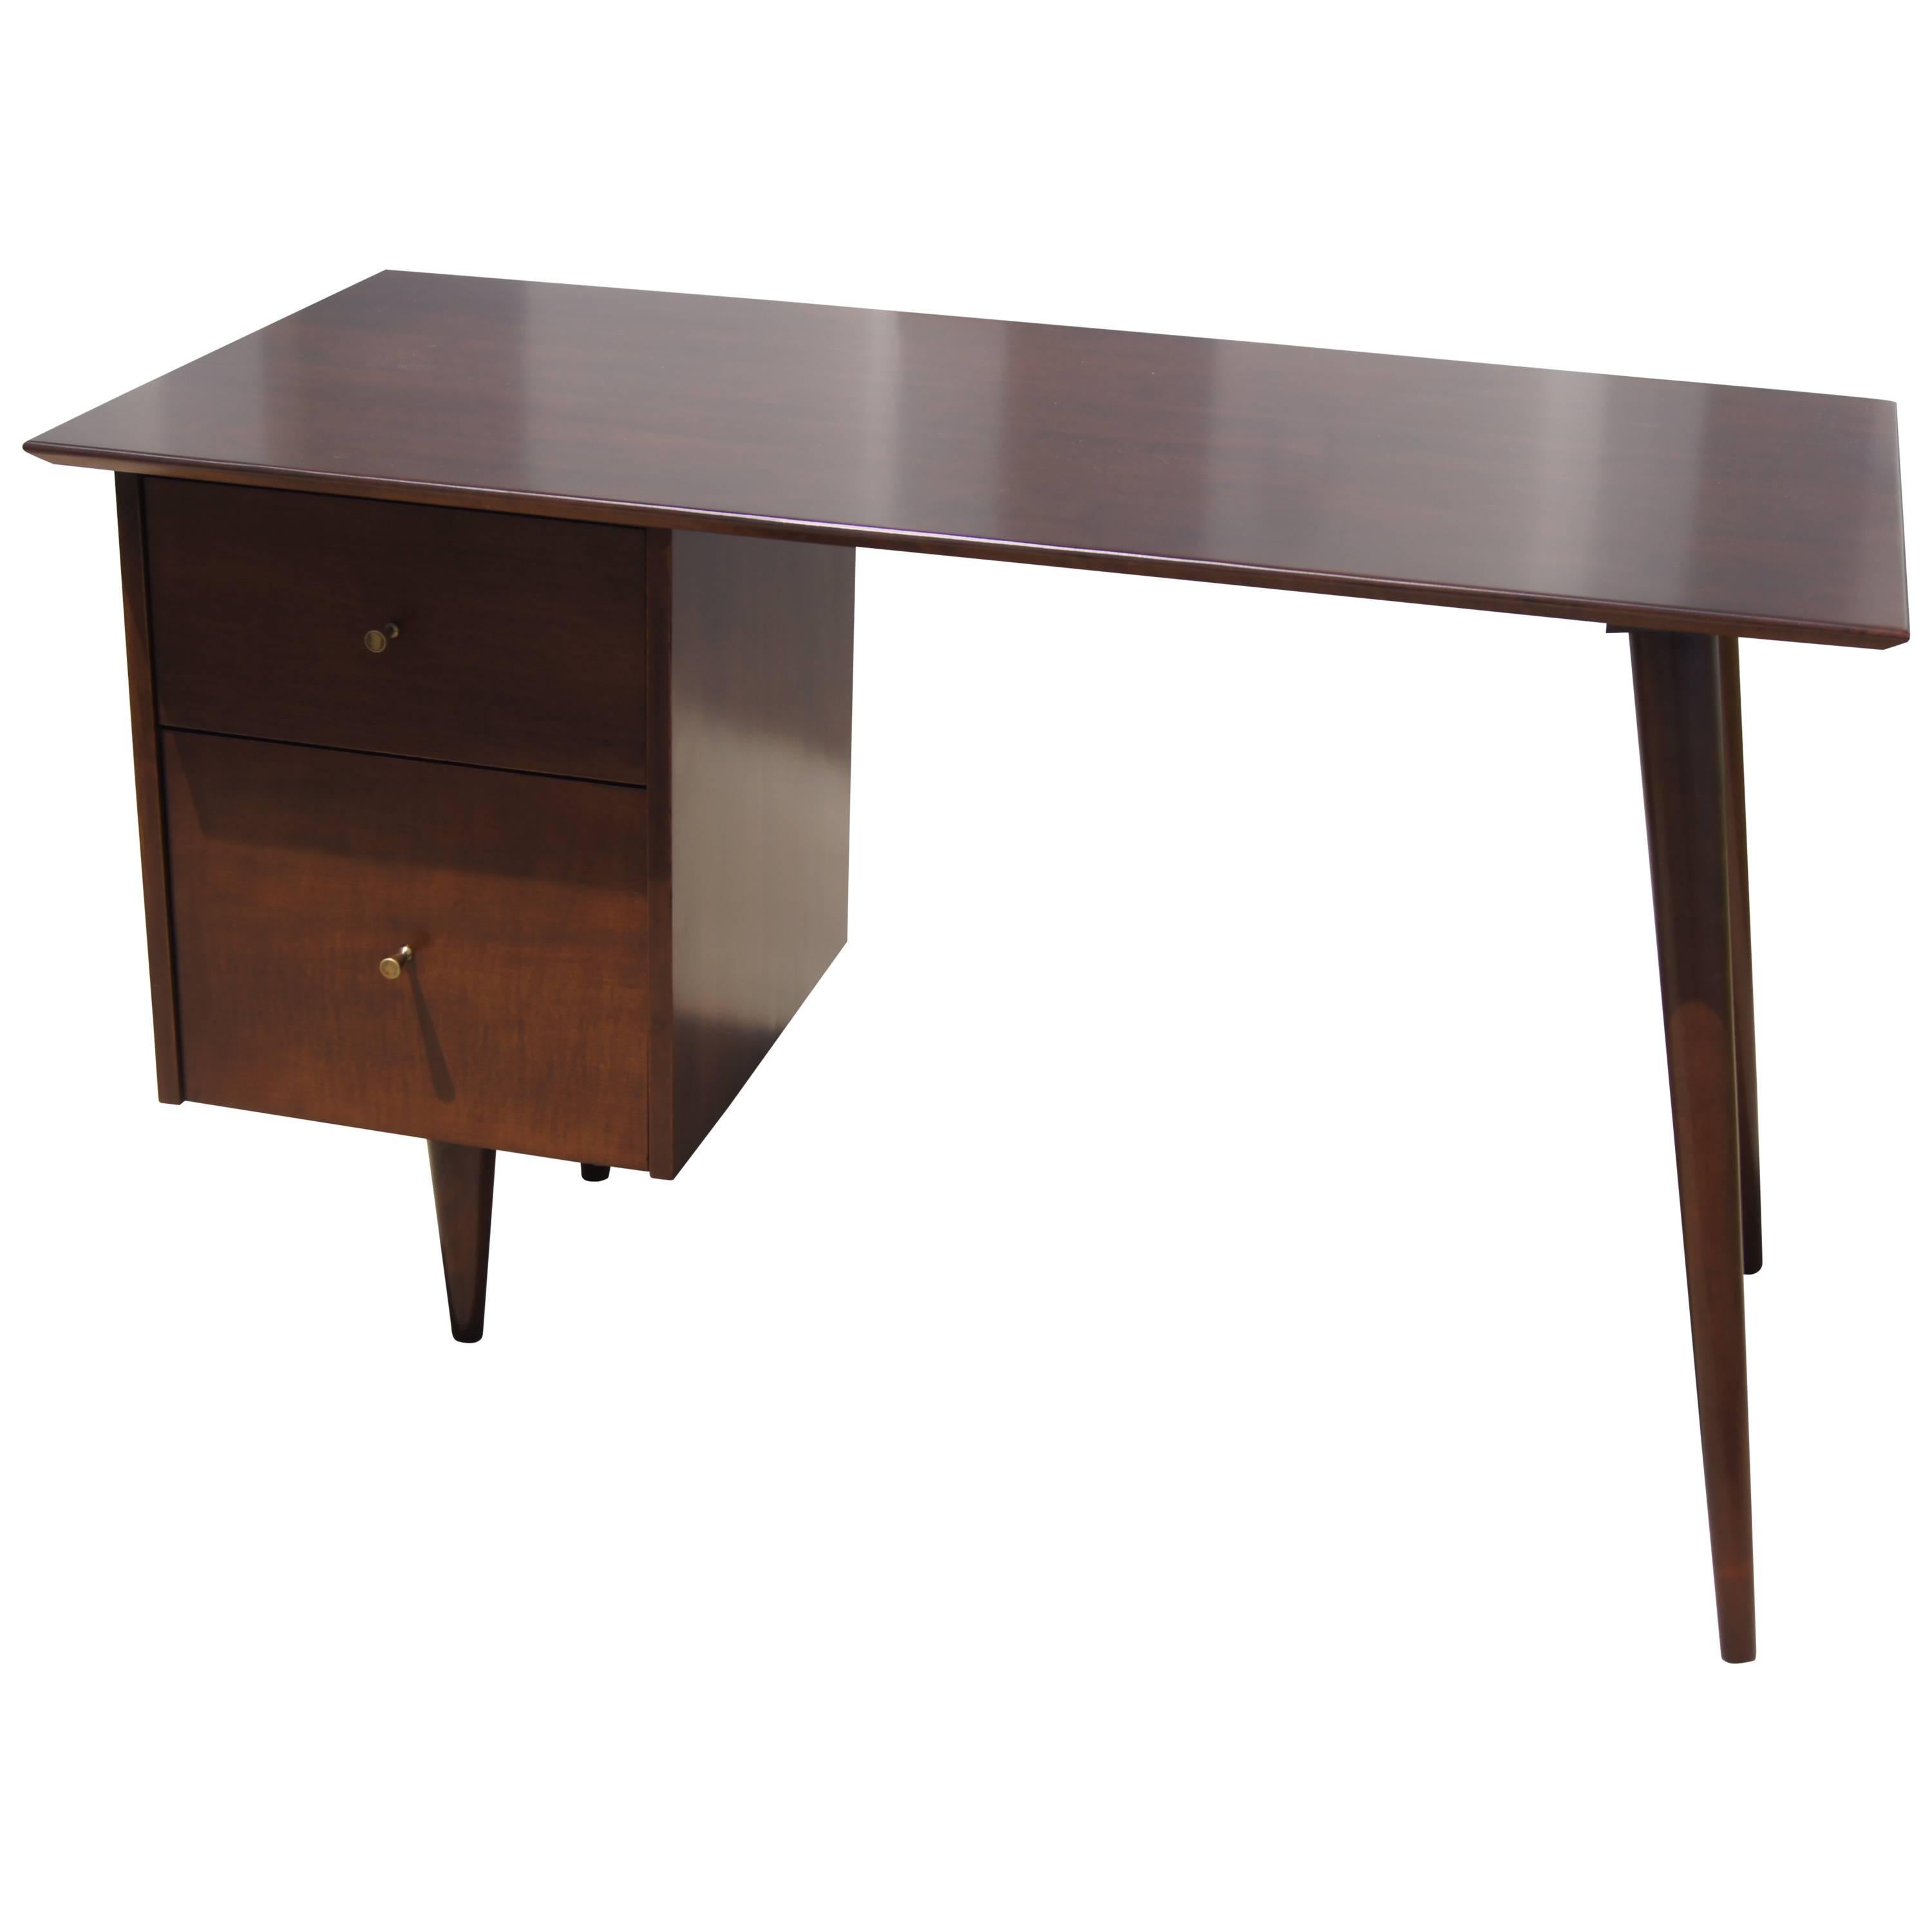 Planner Group Desk by Paul McCobb for Winchendon